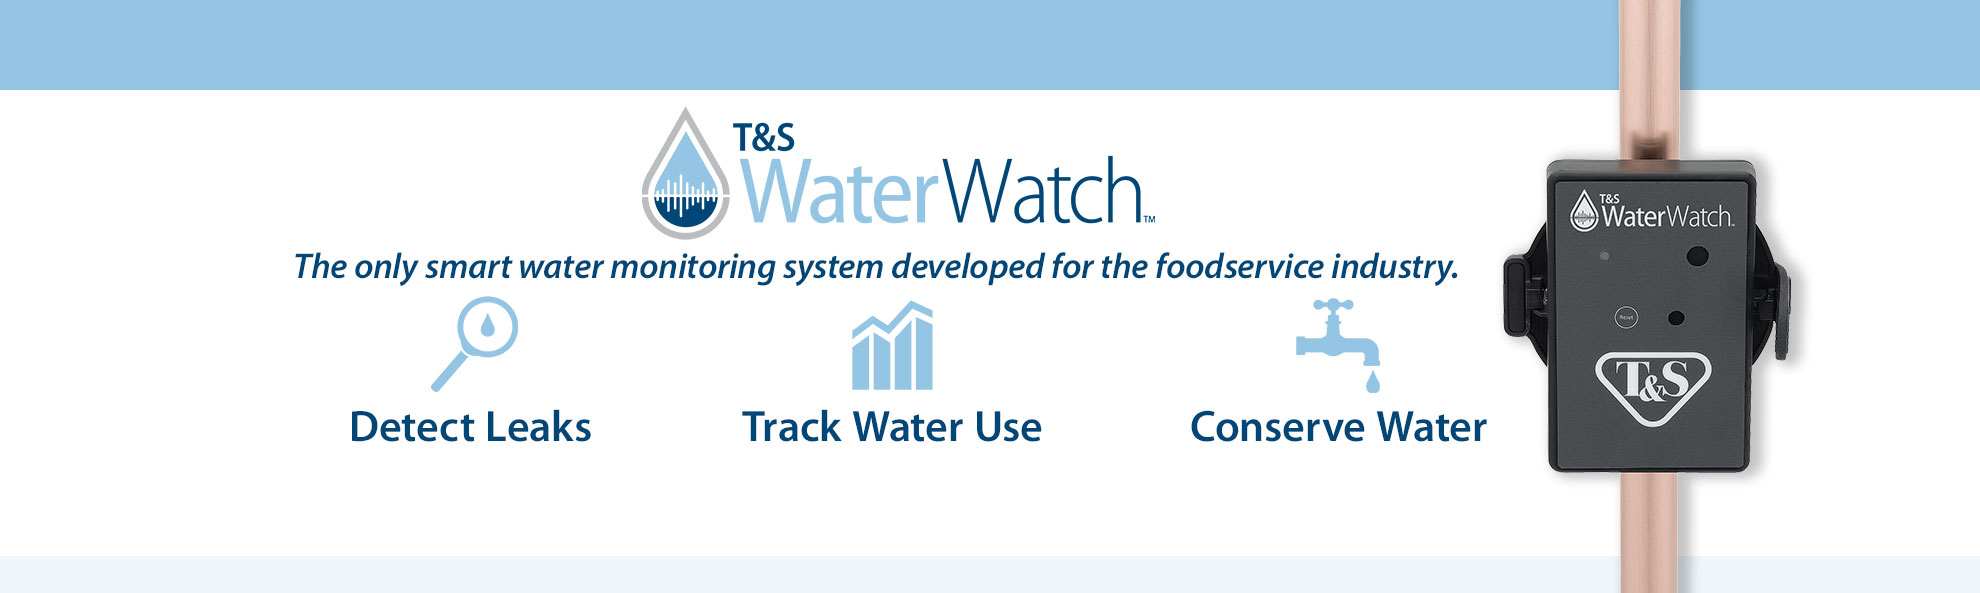 Introducing the all-new T&S WaterWatch